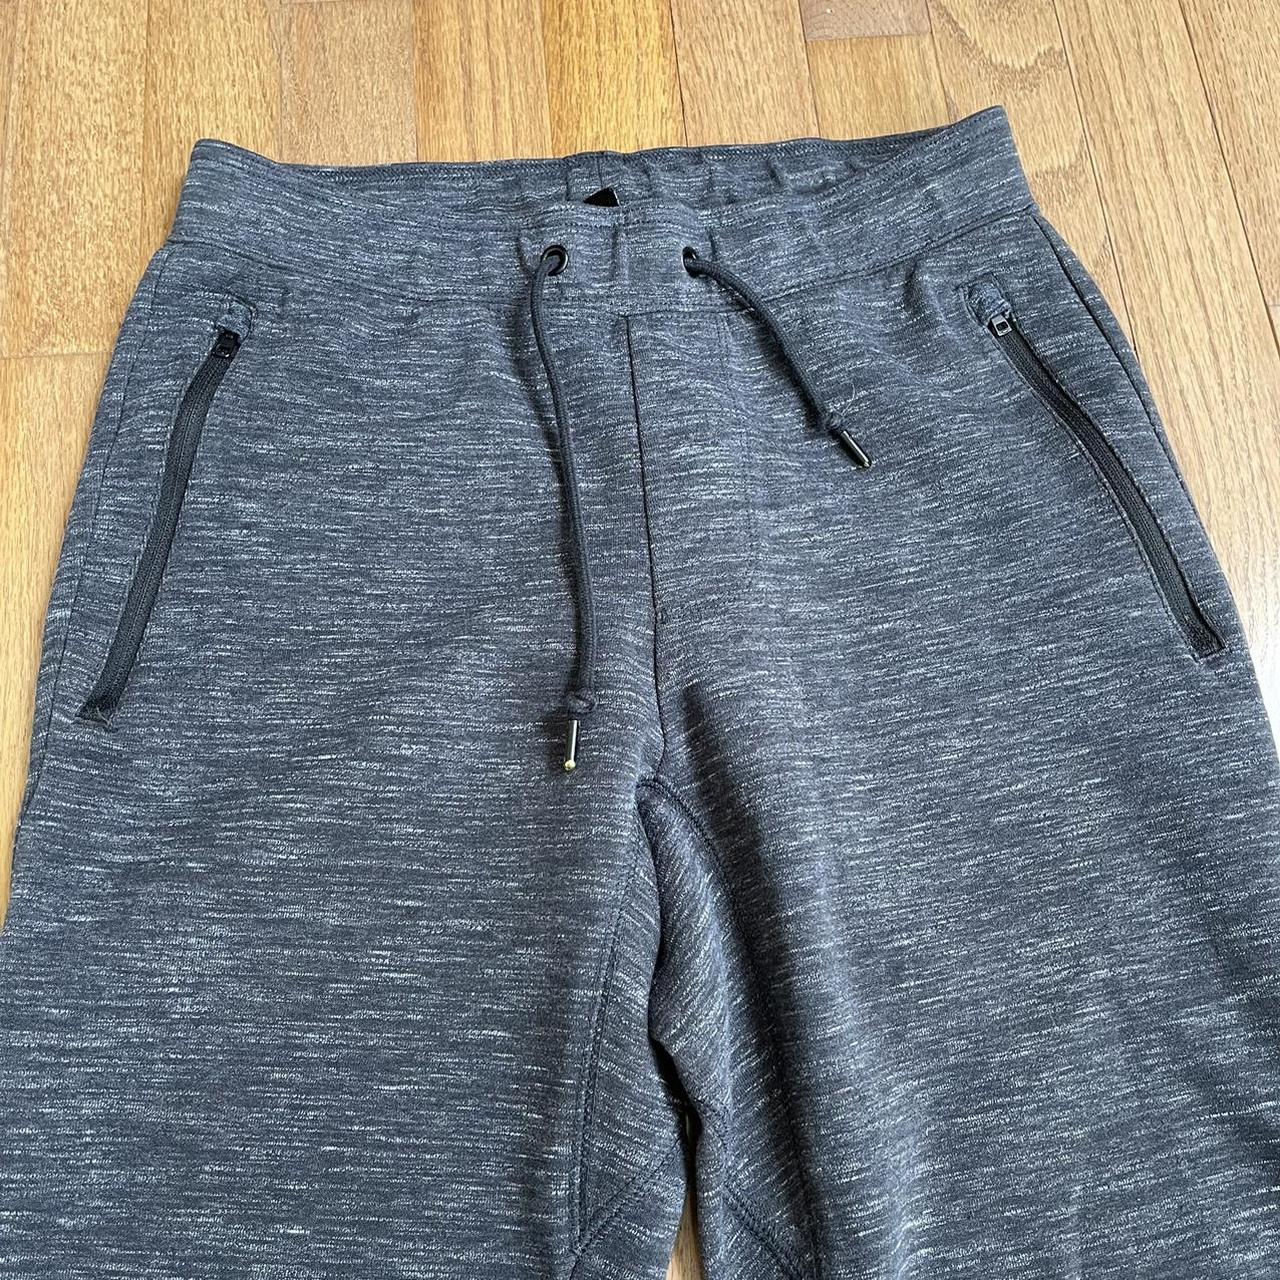 UNIQLO Men's Grey and White Joggers-tracksuits | Depop